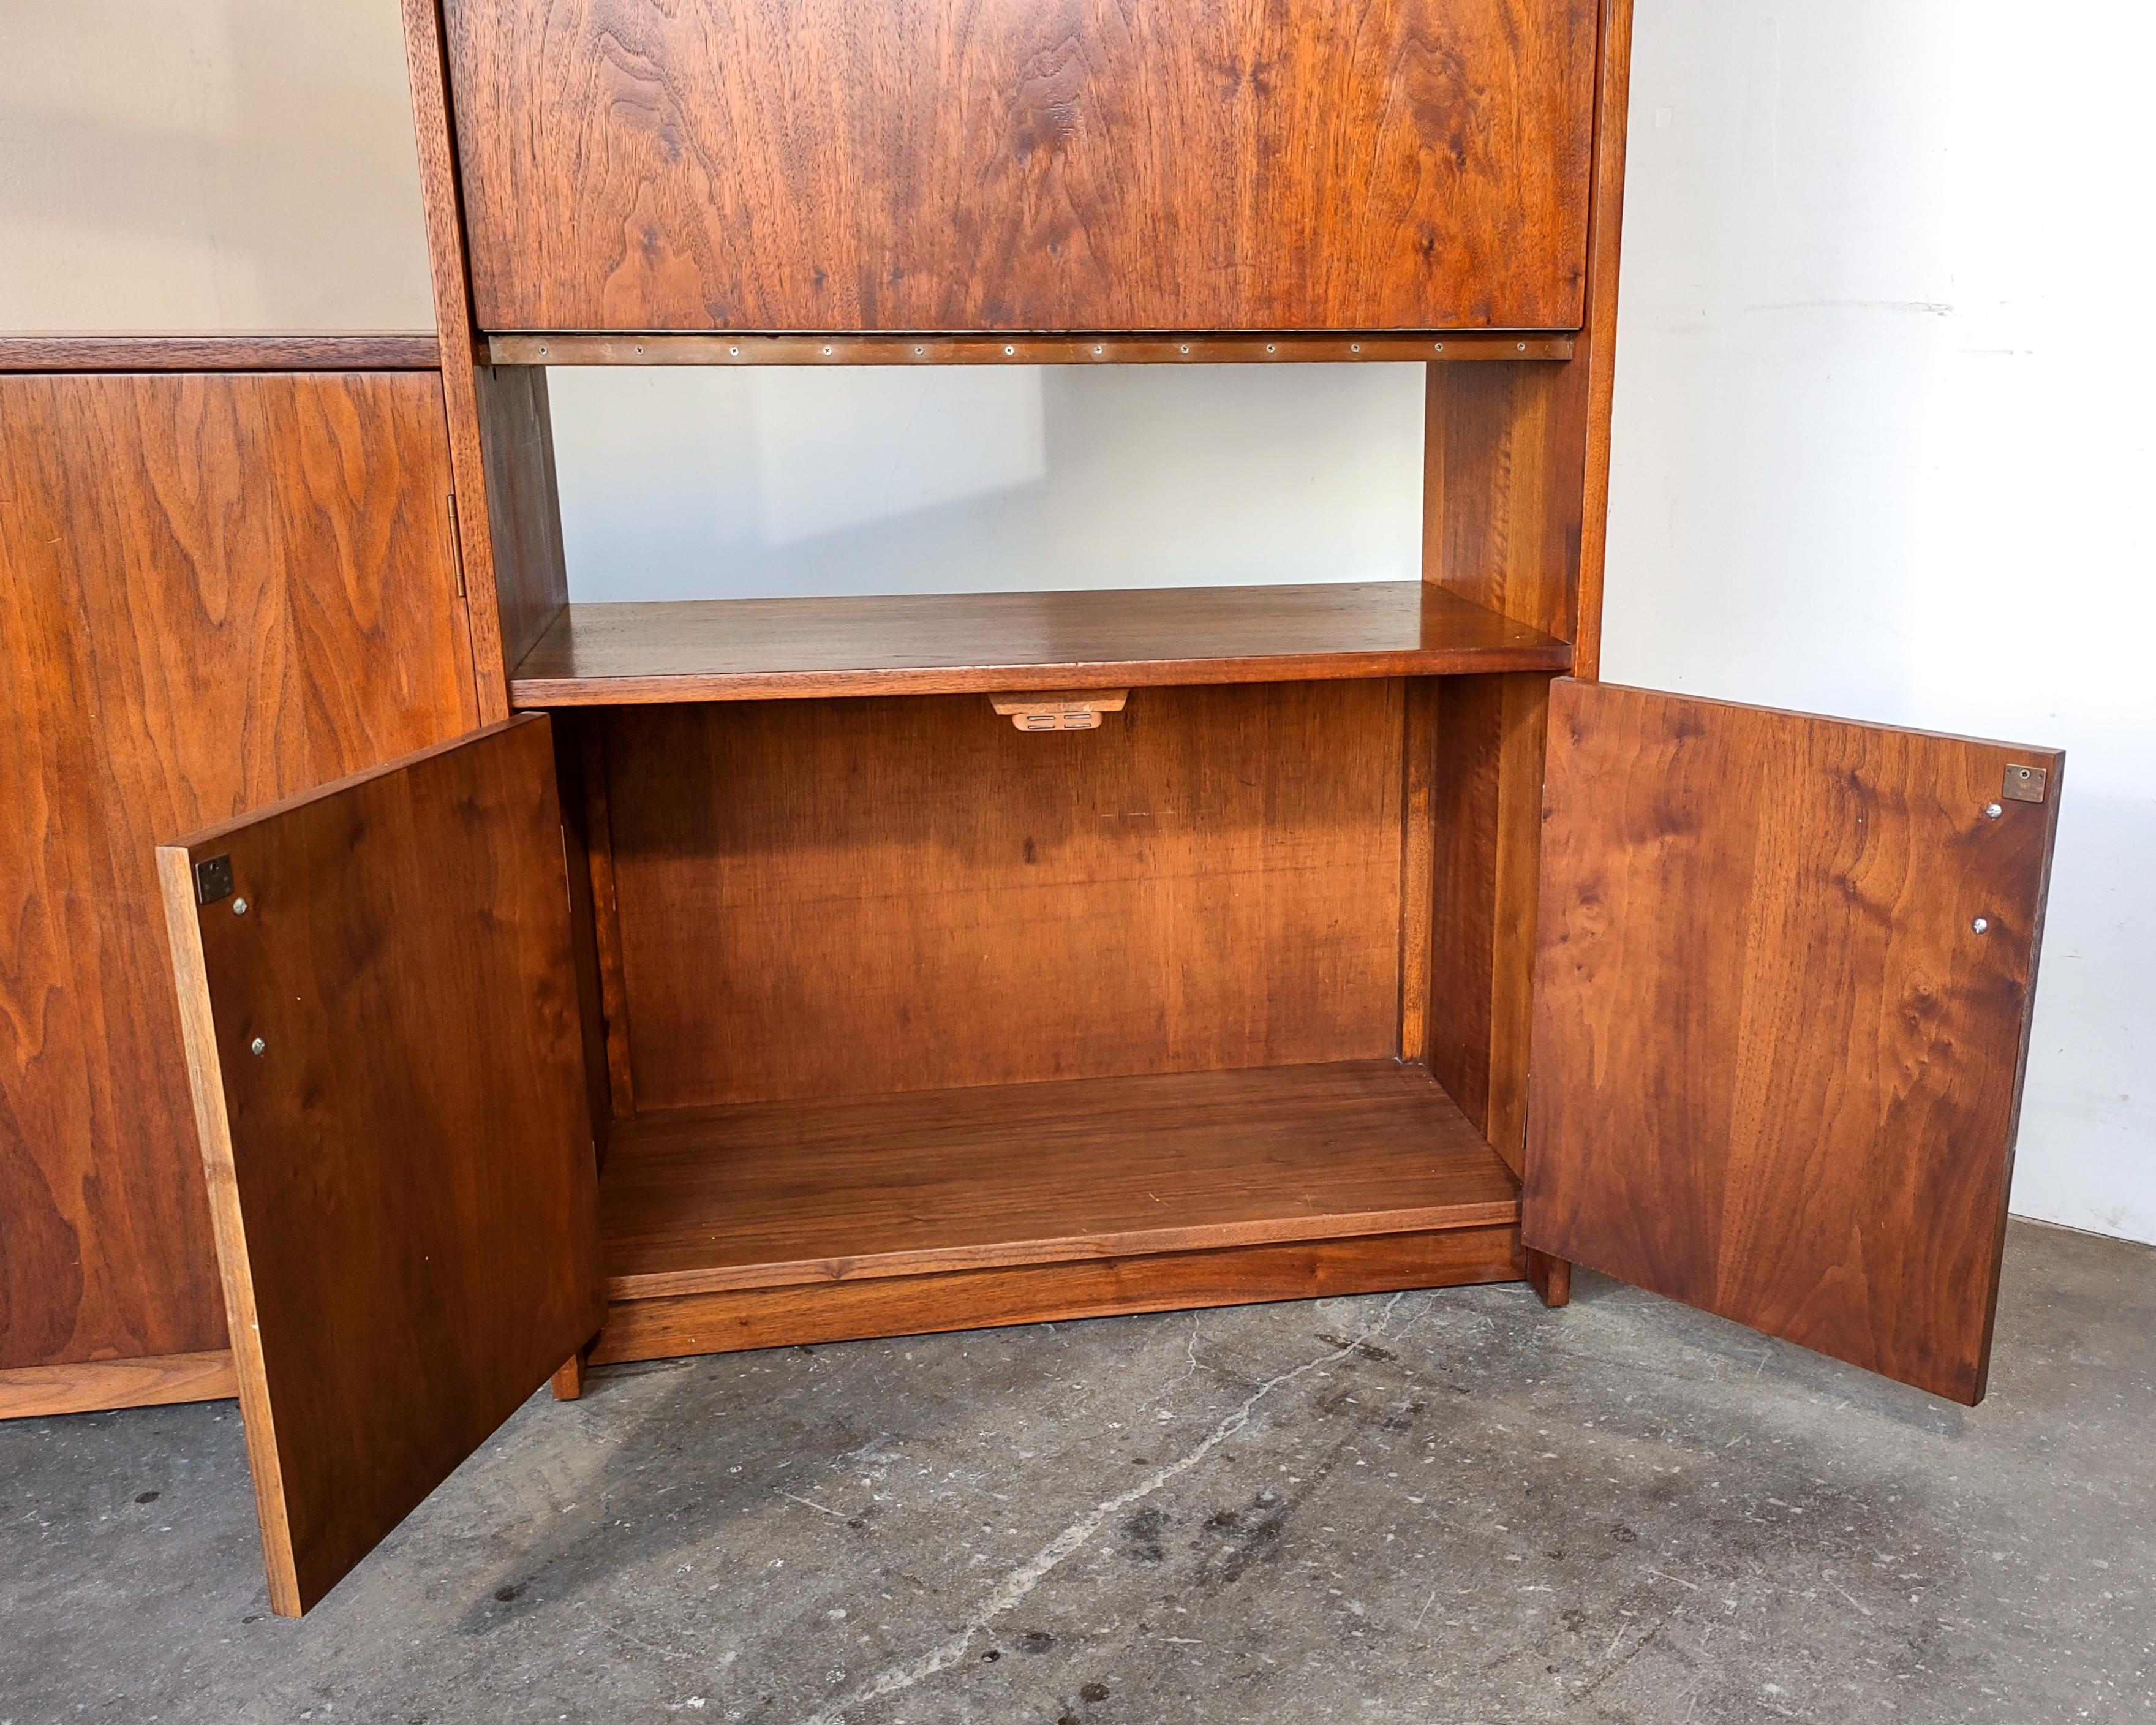 1960s Mid-Century Modern Walnut Room Divider / Wall Unit with Drop-Down Desk 3